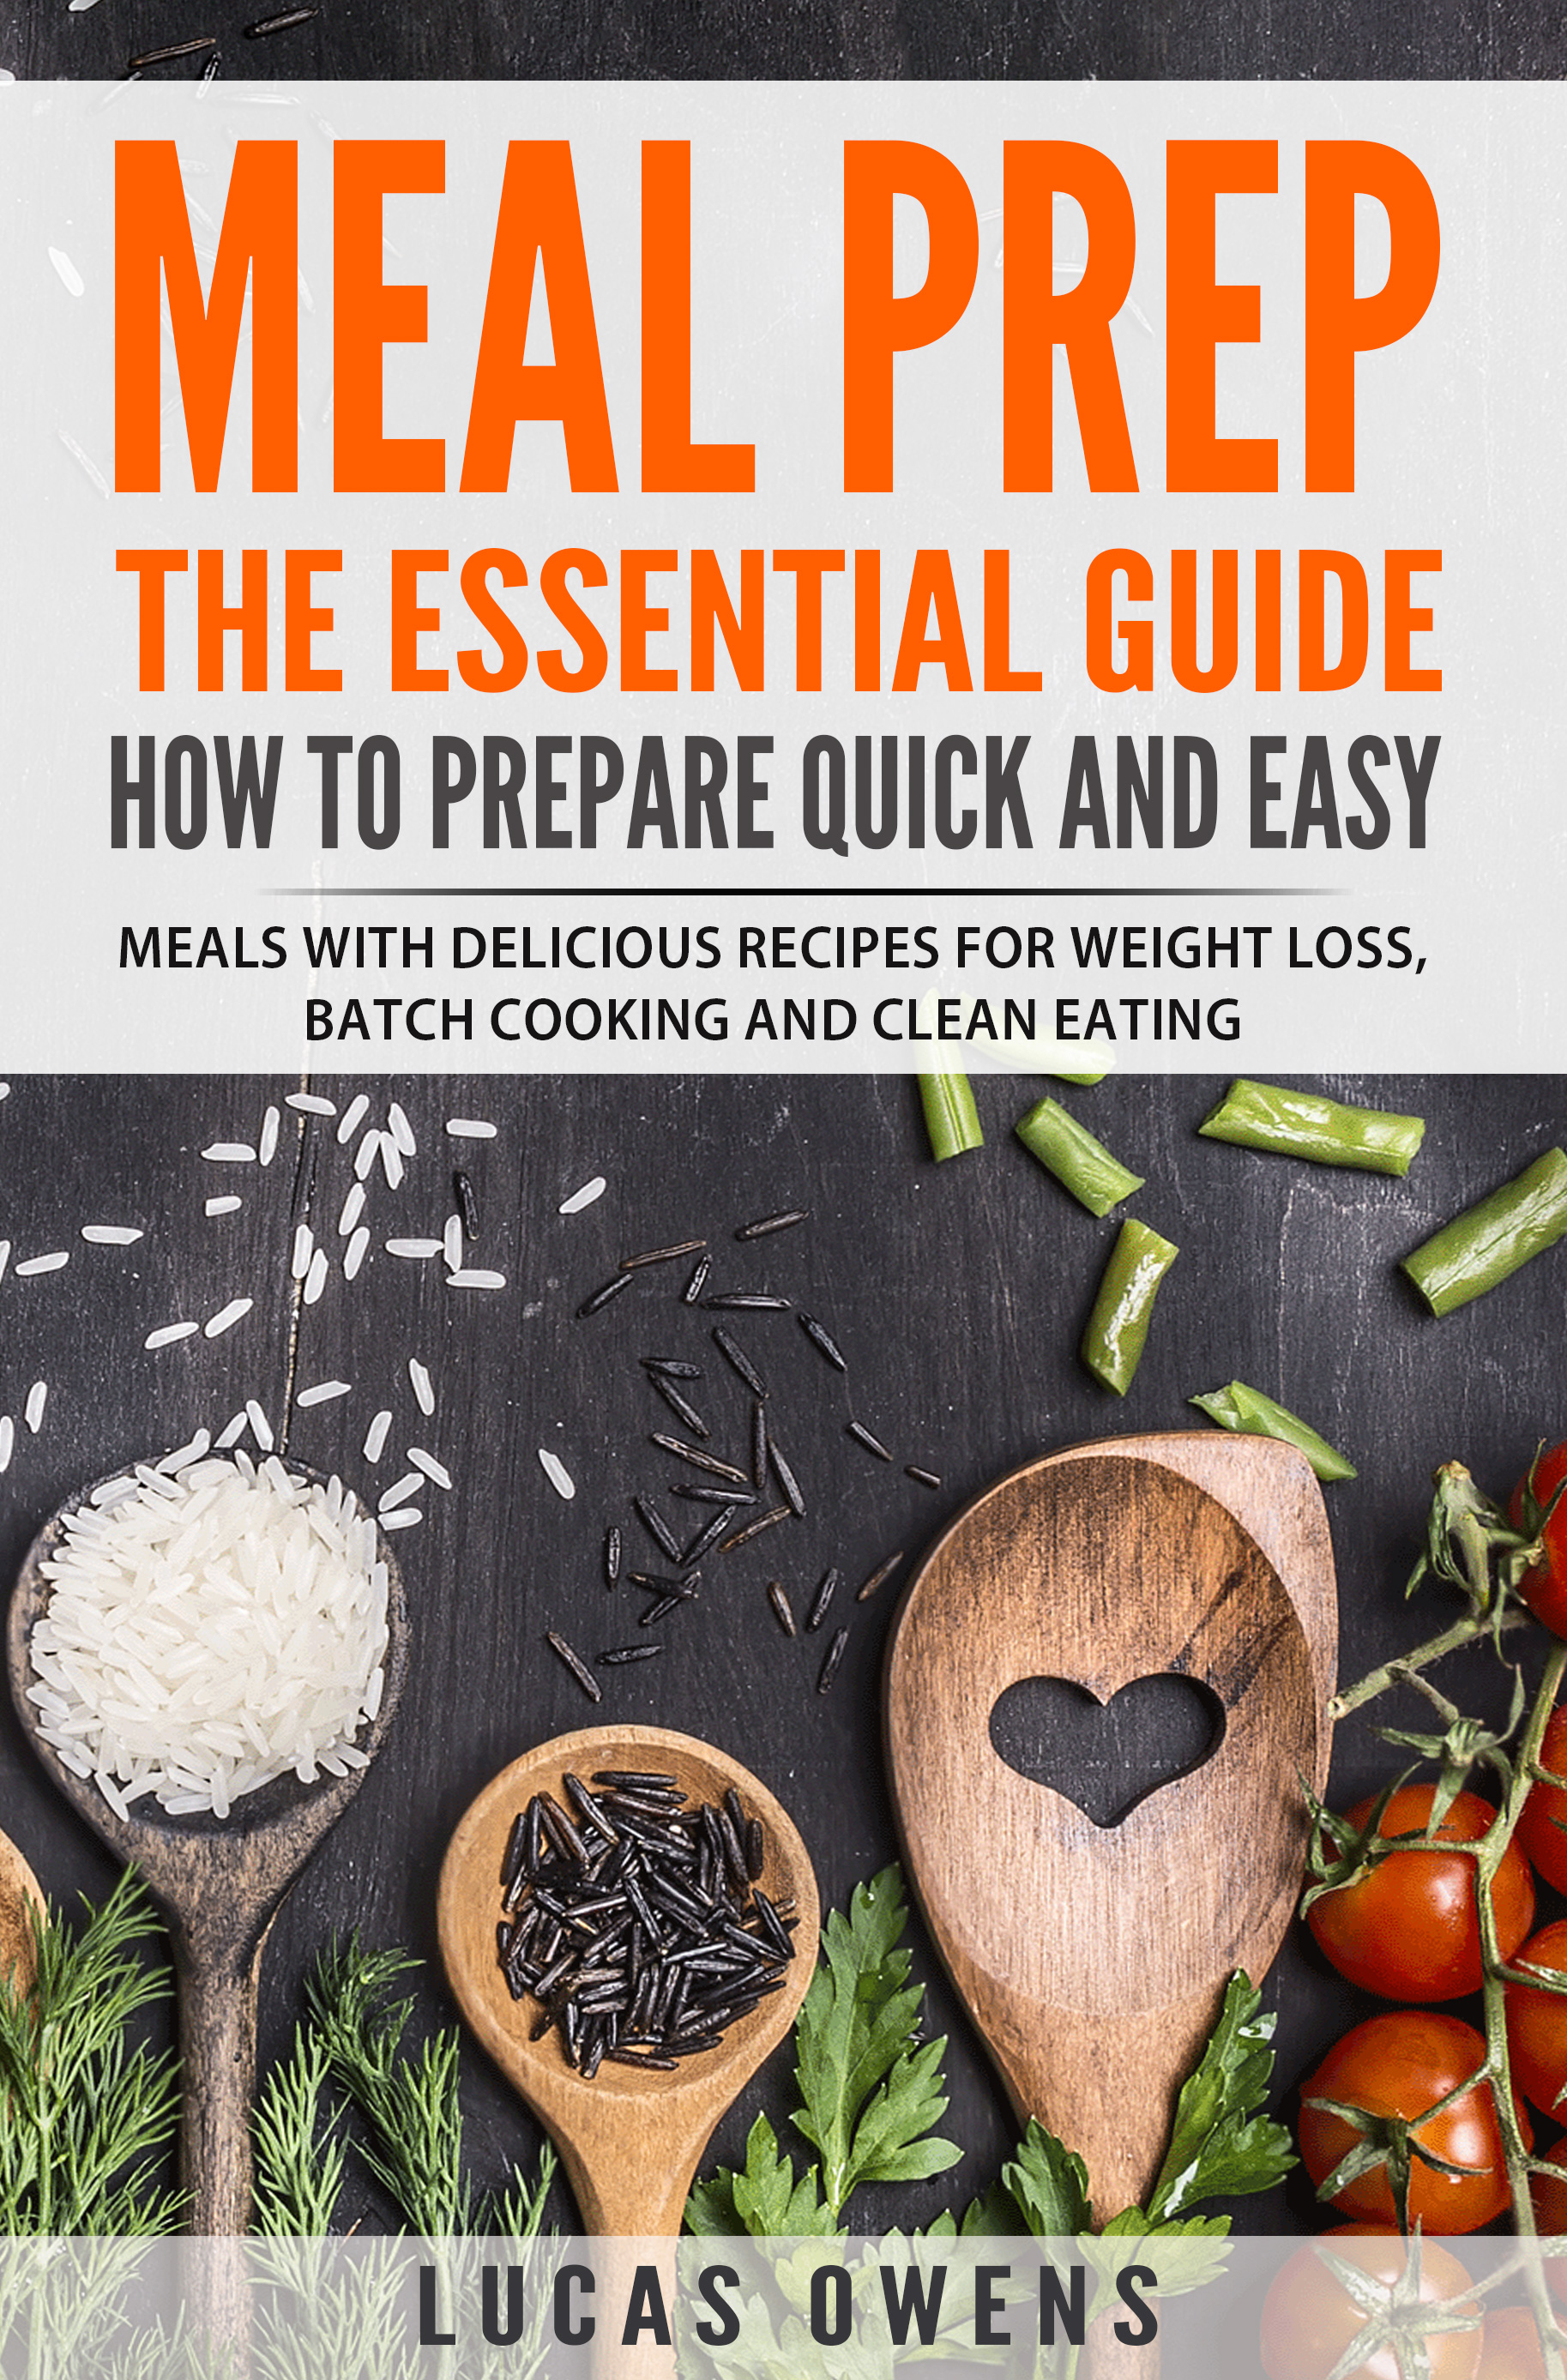 FREE: Meal Prep: The Essential Guide How to Prepare Quick and Easy Meals with Delicious Recipes for Weight Loss, Batch Cooking, and Clean Eating by Lucas Owens